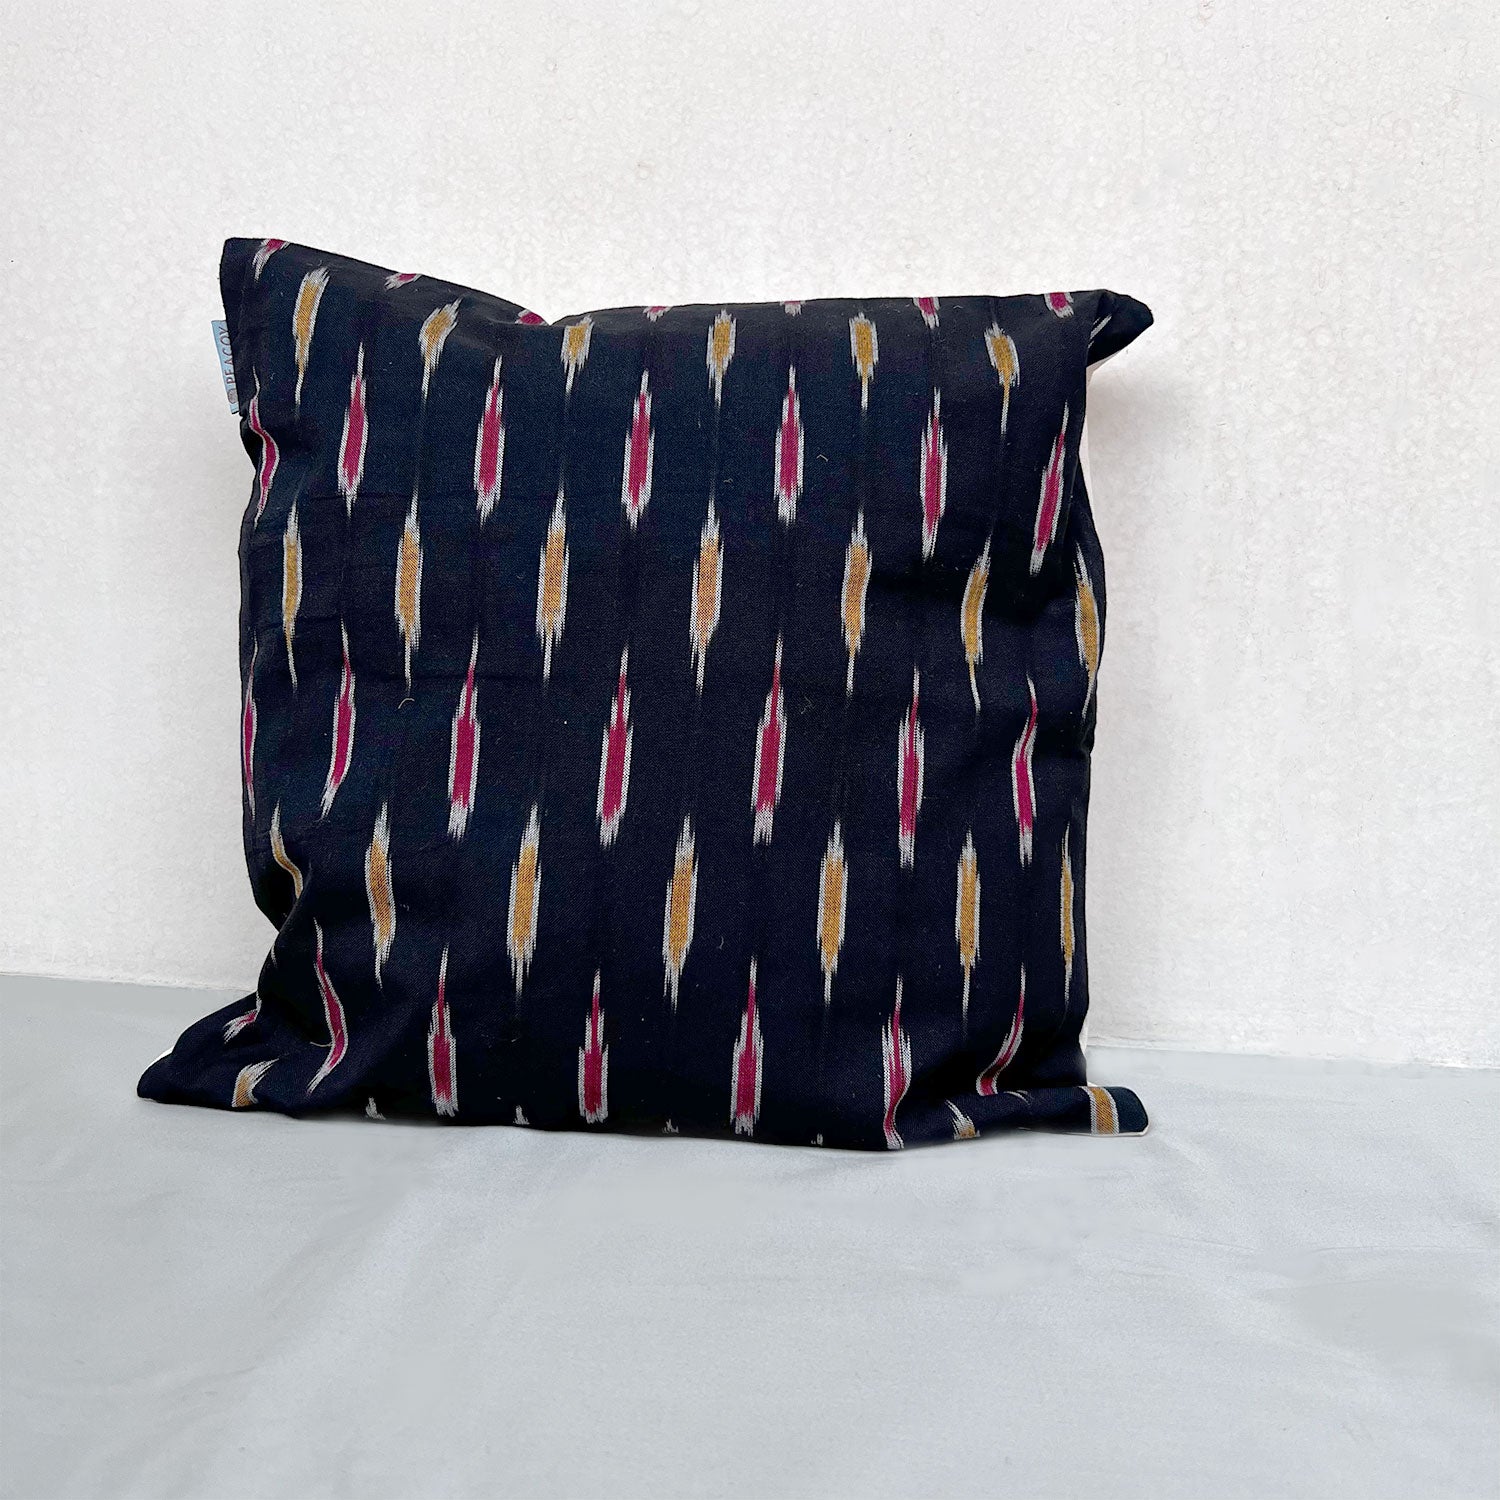 Black Abstract 100% Cotton Cushion Cover - 16 x 16 inches